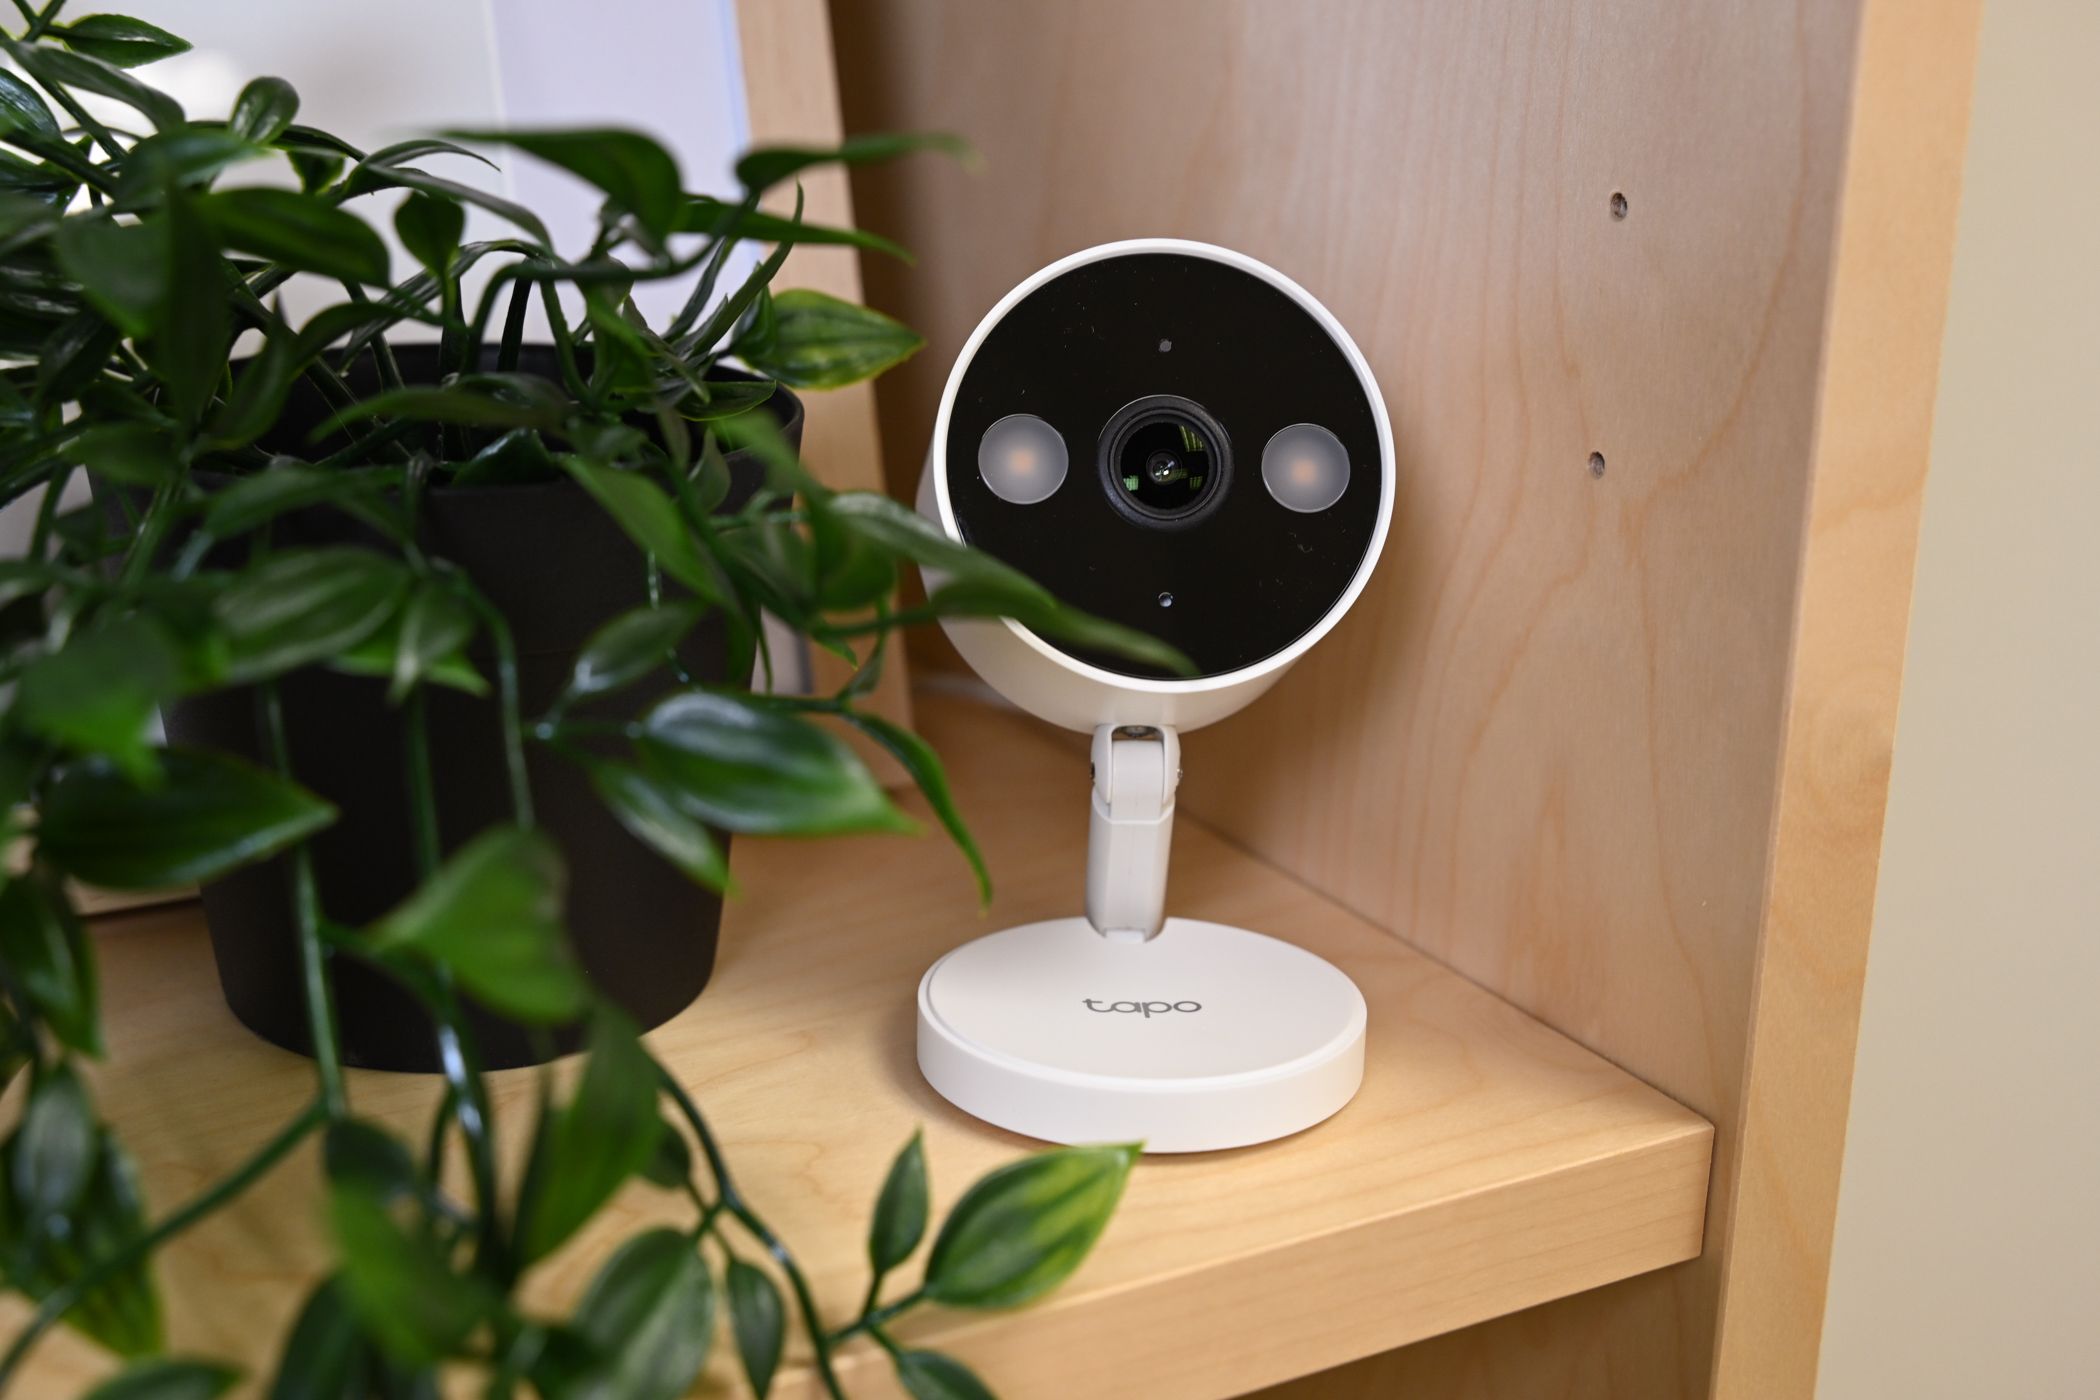 Tapo Security Camera on bookshelf with plant